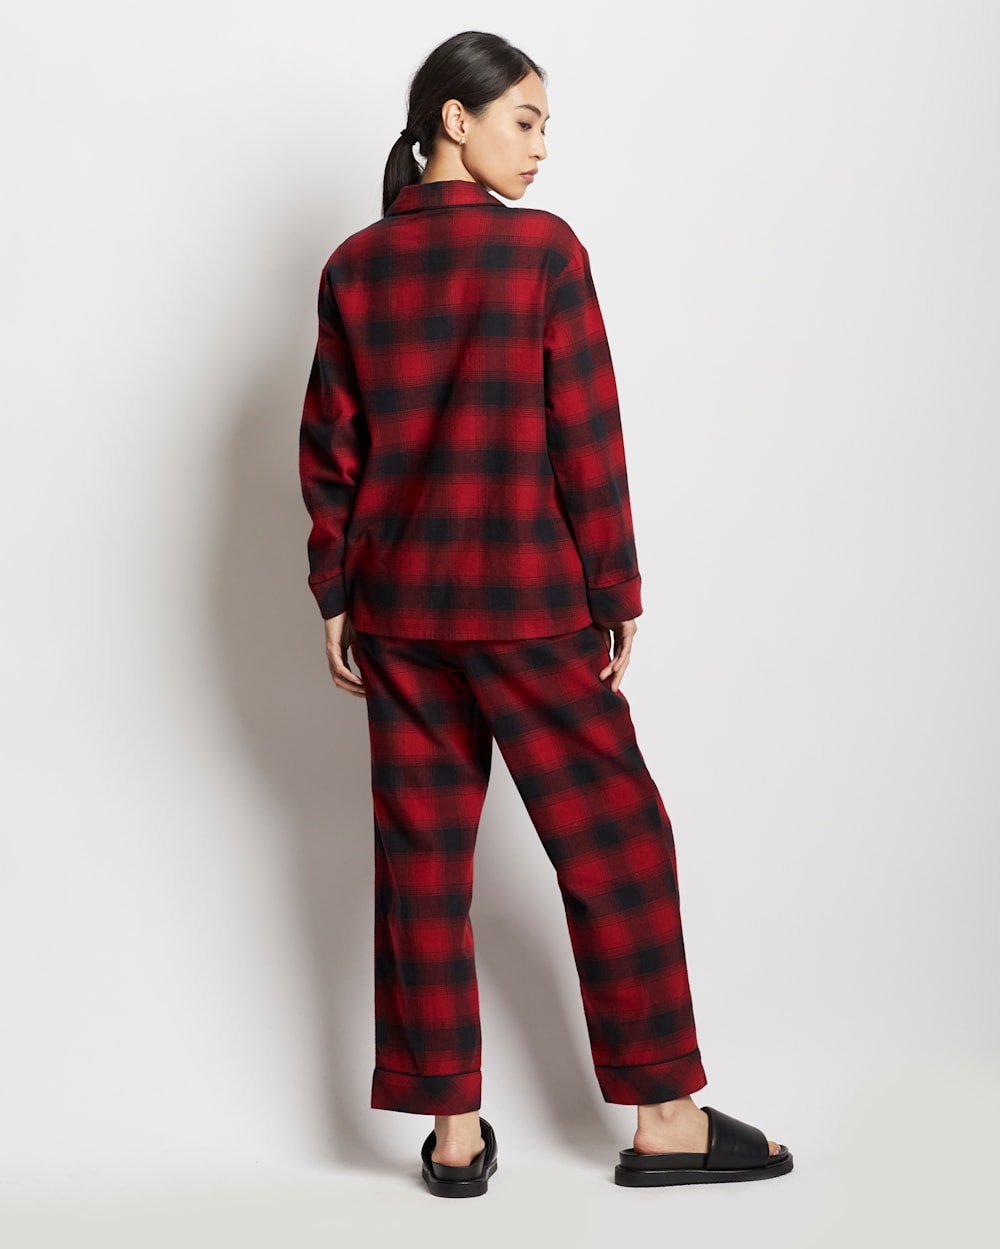 ALTERNATE VIEW OF WOMEN'S PAJAMA SET IN RED/BLACK OMBRE image number 4